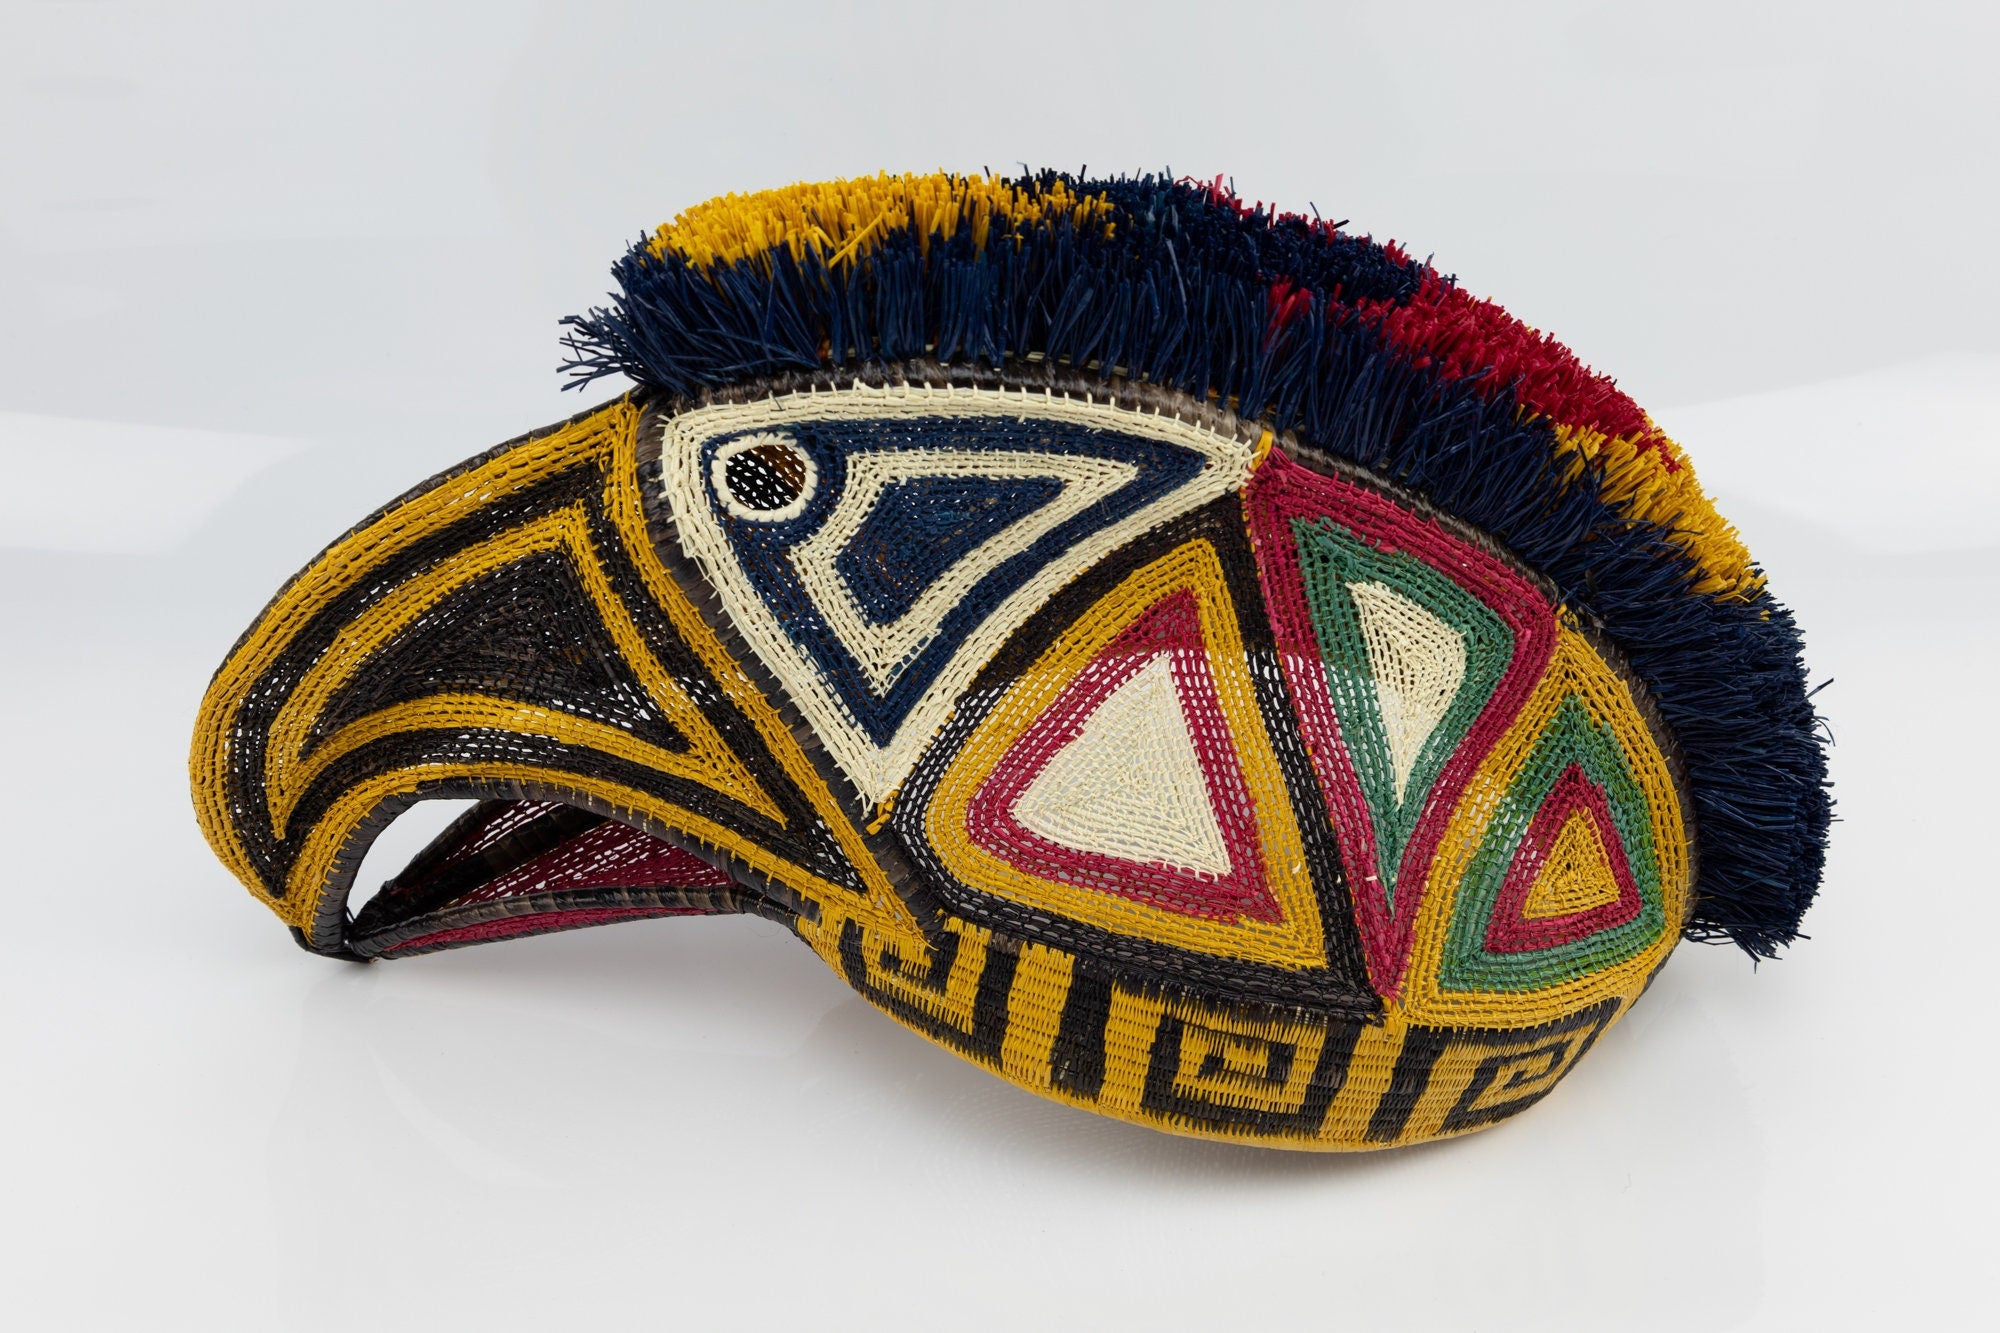 Hand Woven Large Parrot Bird Mask Made By Wounaan And Emberá Panama Indians. Makes Great Wall Decor, Rainforest Art, Decorative Mask